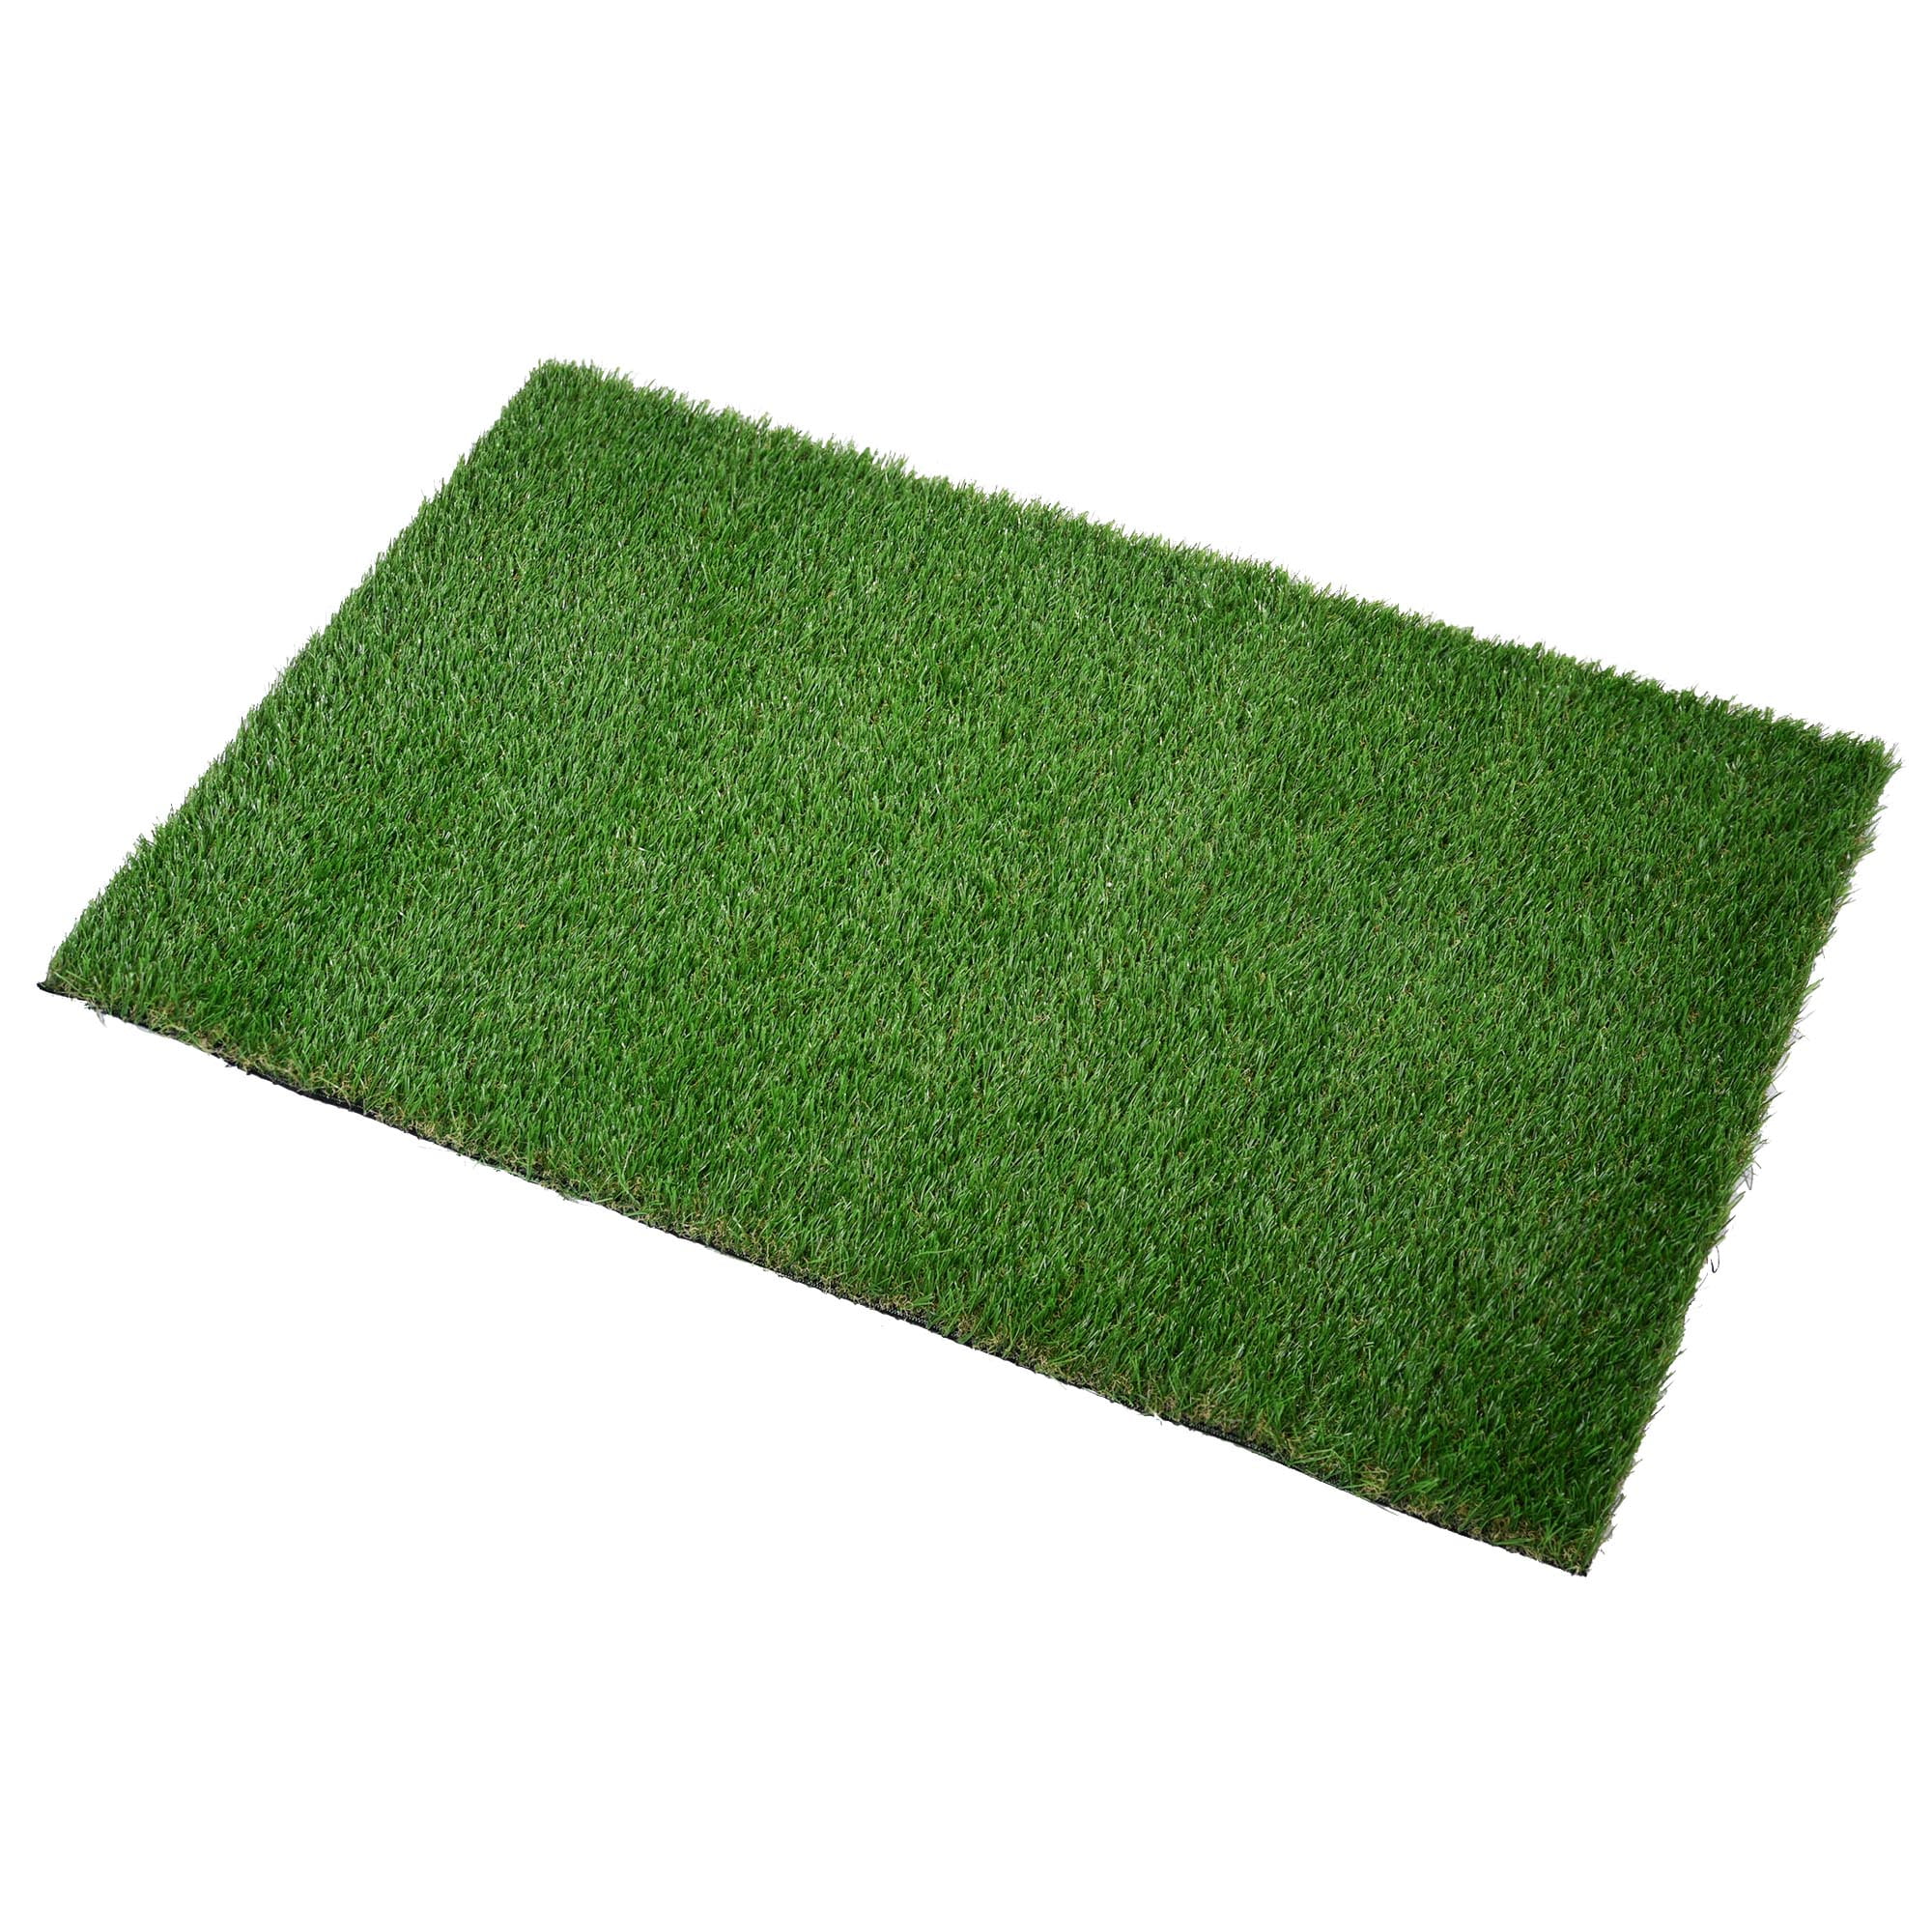 39×28inch Astro Turf Synthetic Lawn Turf Grass Mat Indoor Outdoor Landscape Pet Dog Area with Drainage Holes Artificial Grass Door Mat 